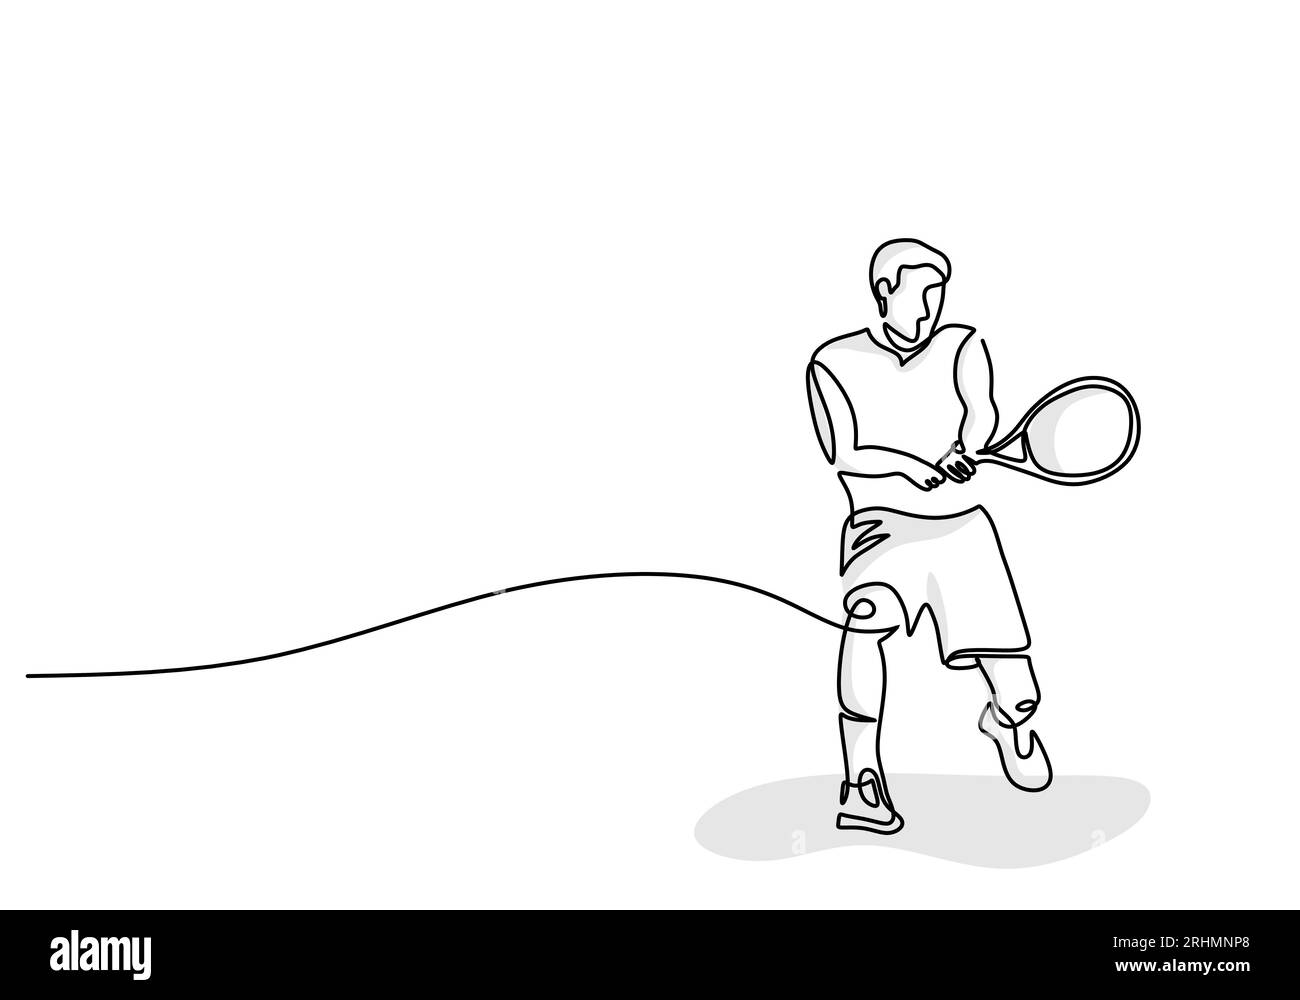 Tennis Player Continuous Line Drawing, Sport Game Hand Drawn Illustration Stock Vektor